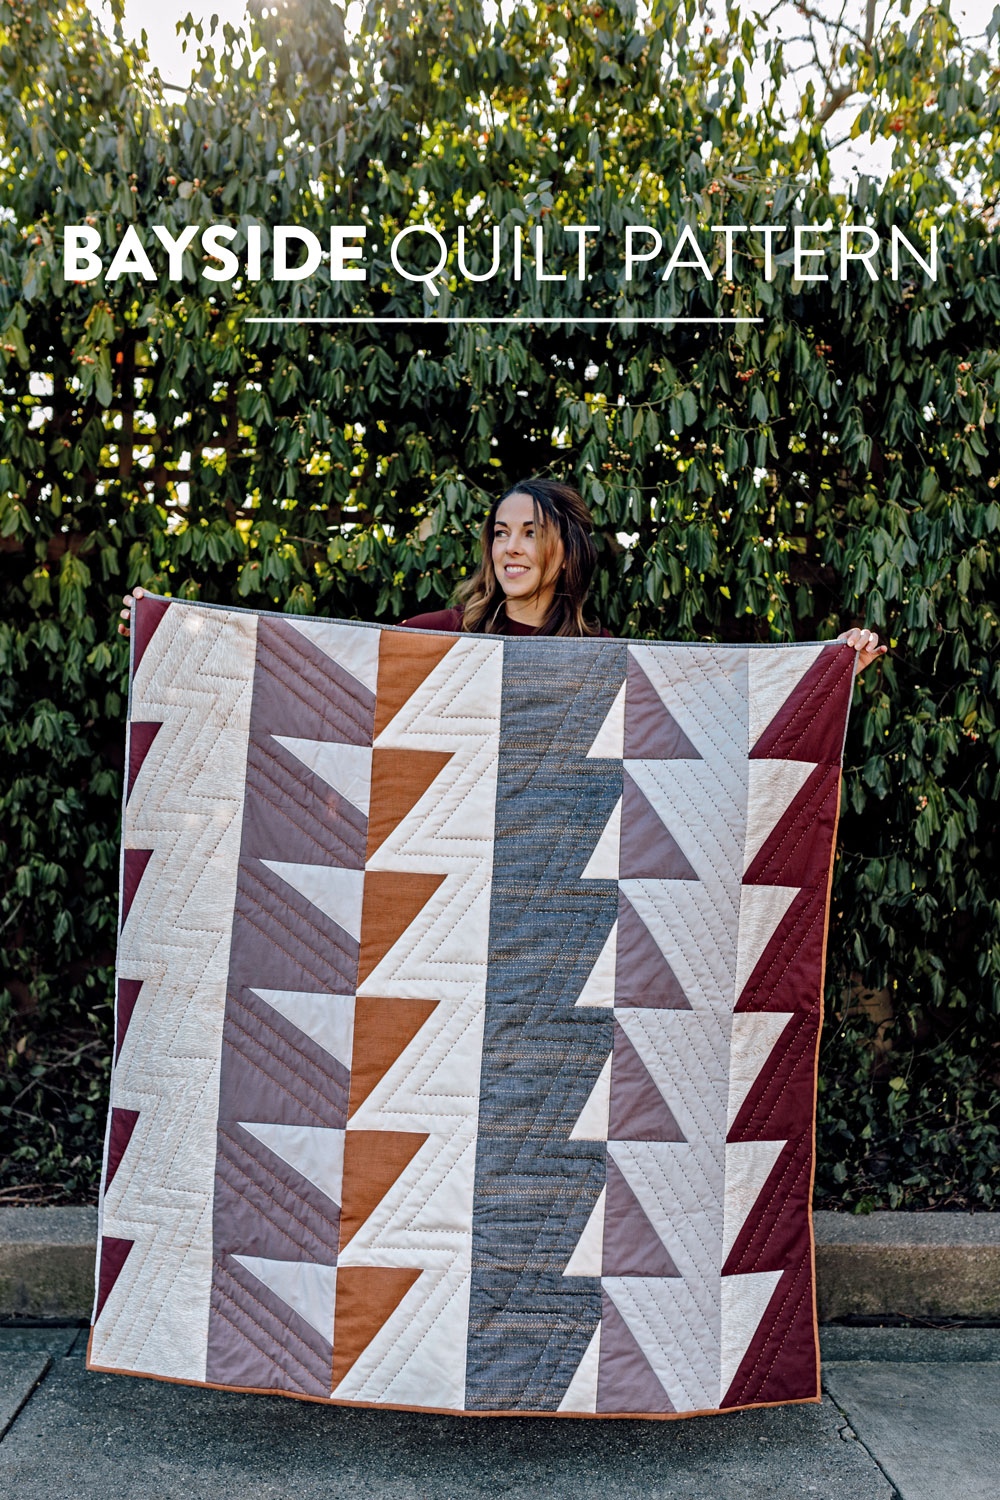 The Bayside Quilt Pattern, Fresh Modern Quilt Design Fabric Inspiration | Suzy Quilts https://suzyquilts.com/bayside-quilt-pattern-video-tutorial